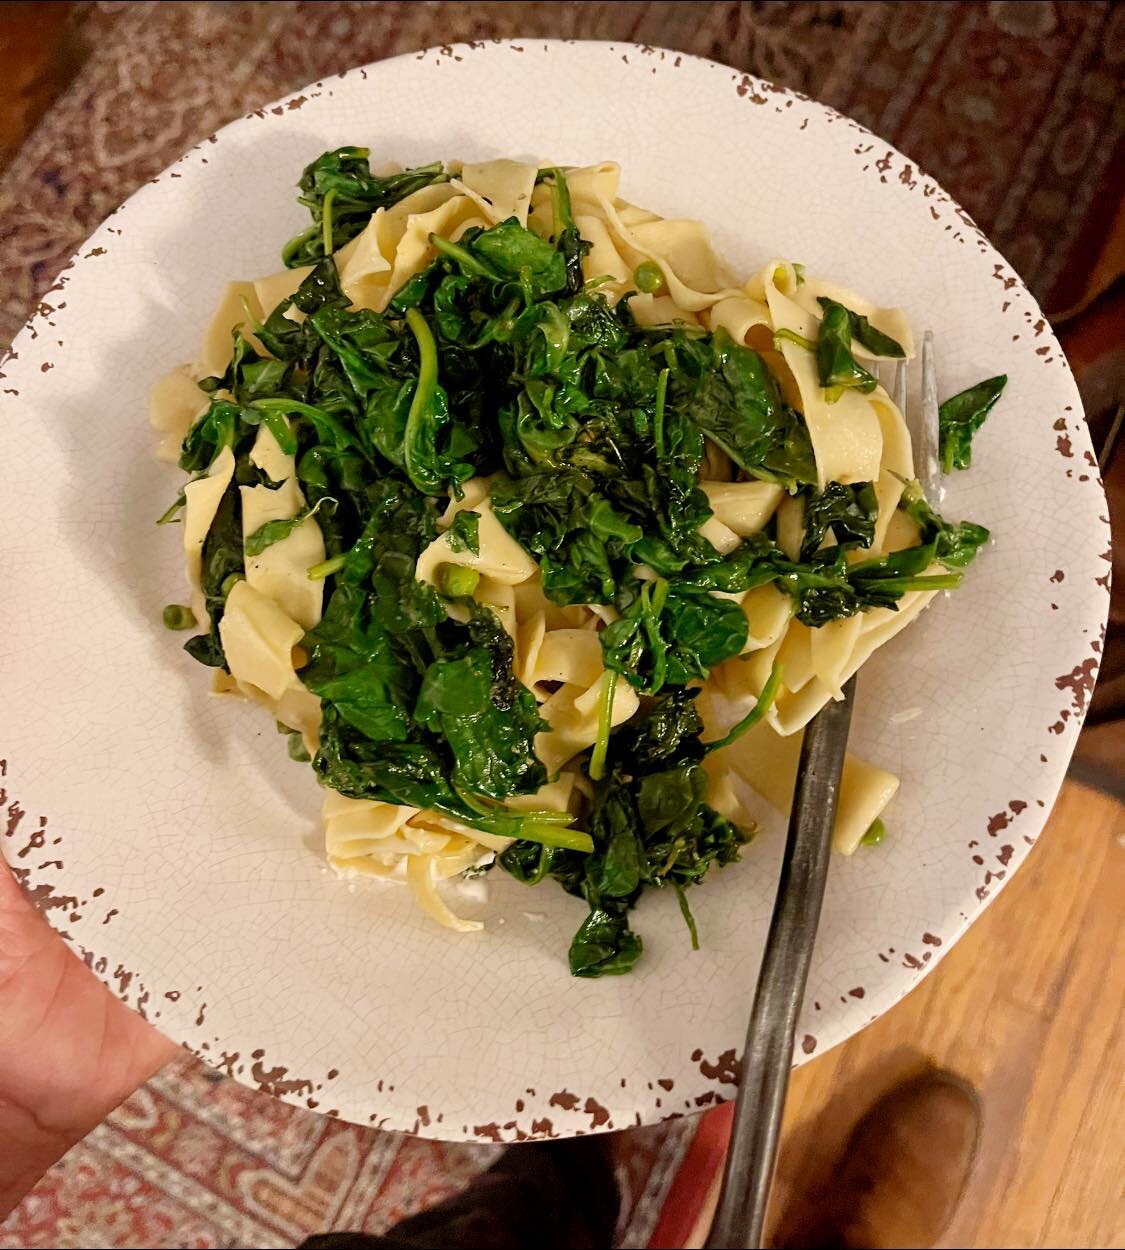 Sometimes I need a plate of egg pasta cooked Al dente topped with spinach, arugula and peas saut&eacute;ed with lots of olive oil, garlic, black pepper and nutmeg, then tossed with ch&egrave;vre and and lots of fresh grated Parmigiano.